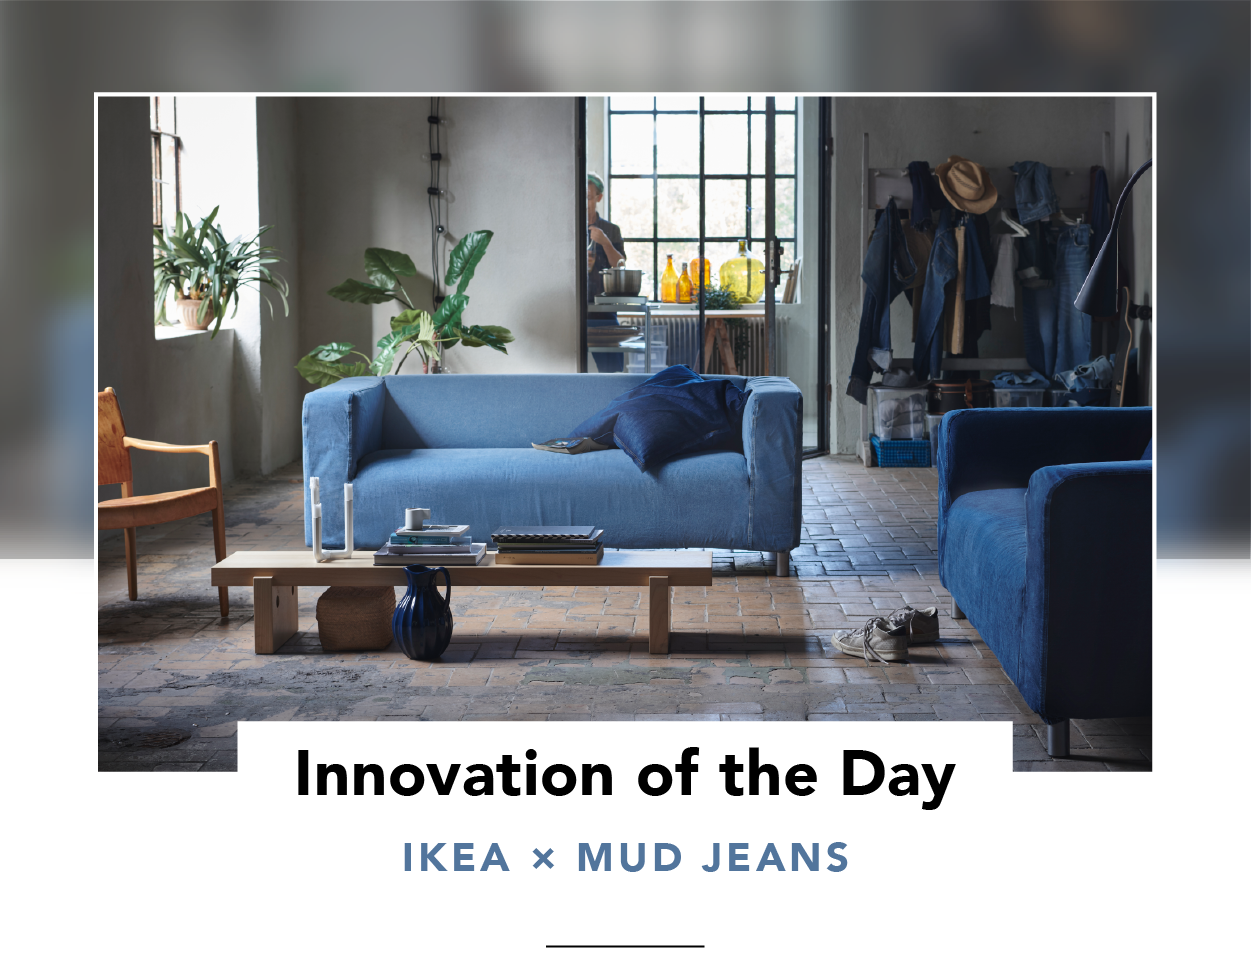 Two denim-covered KLIPPAN sofas in a living room